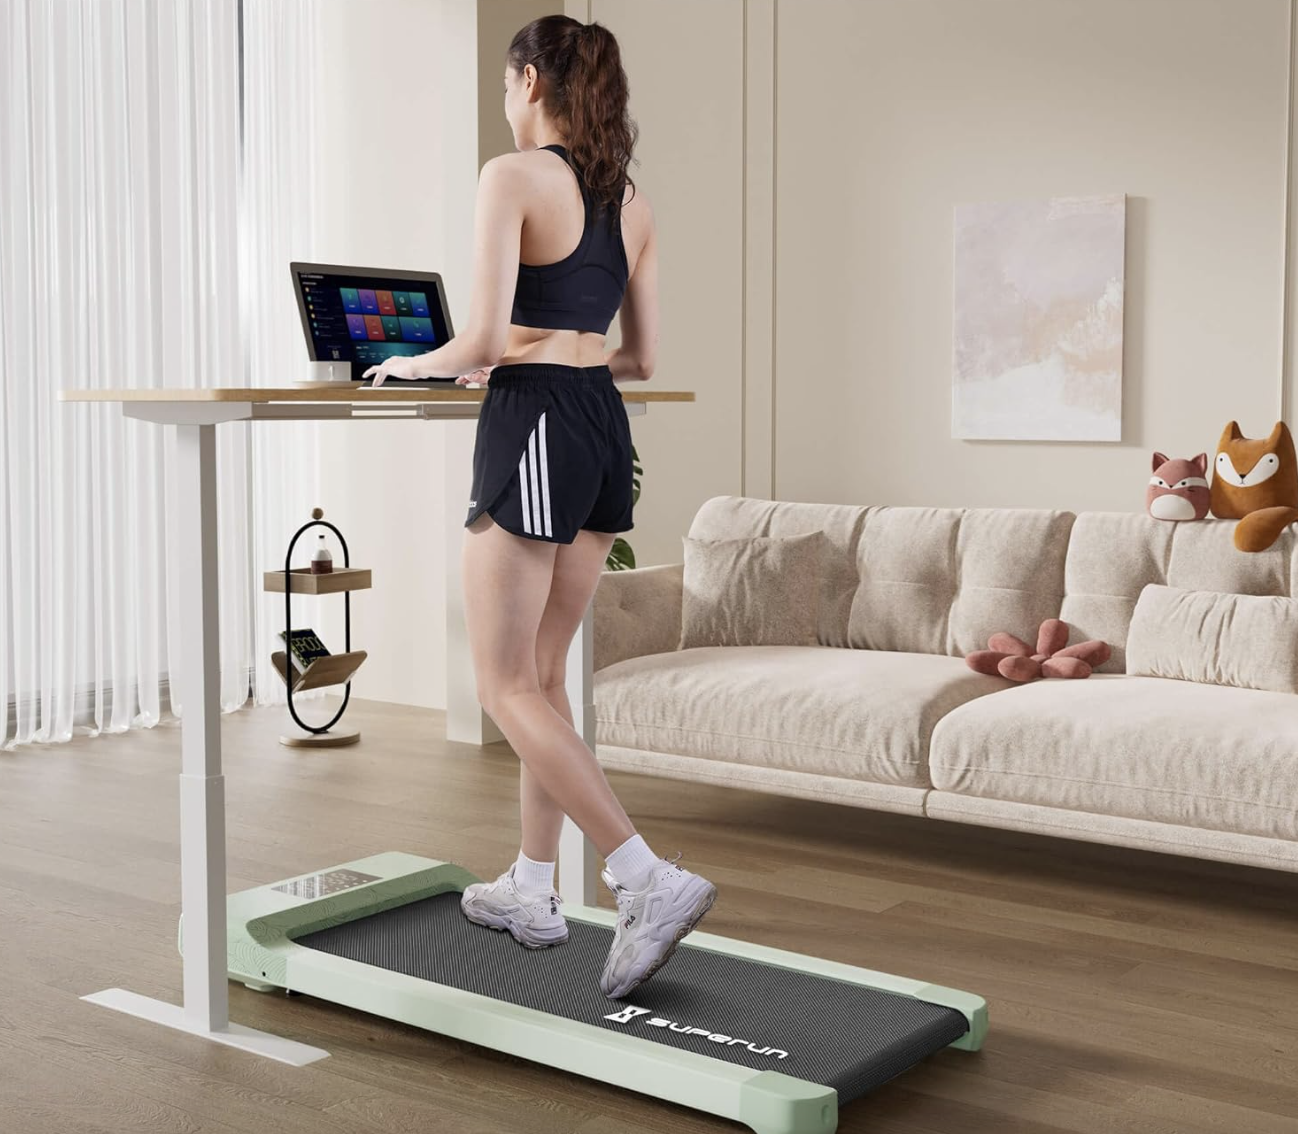 Woman walking on a compact treadmill at a standing desk setup in a home interior